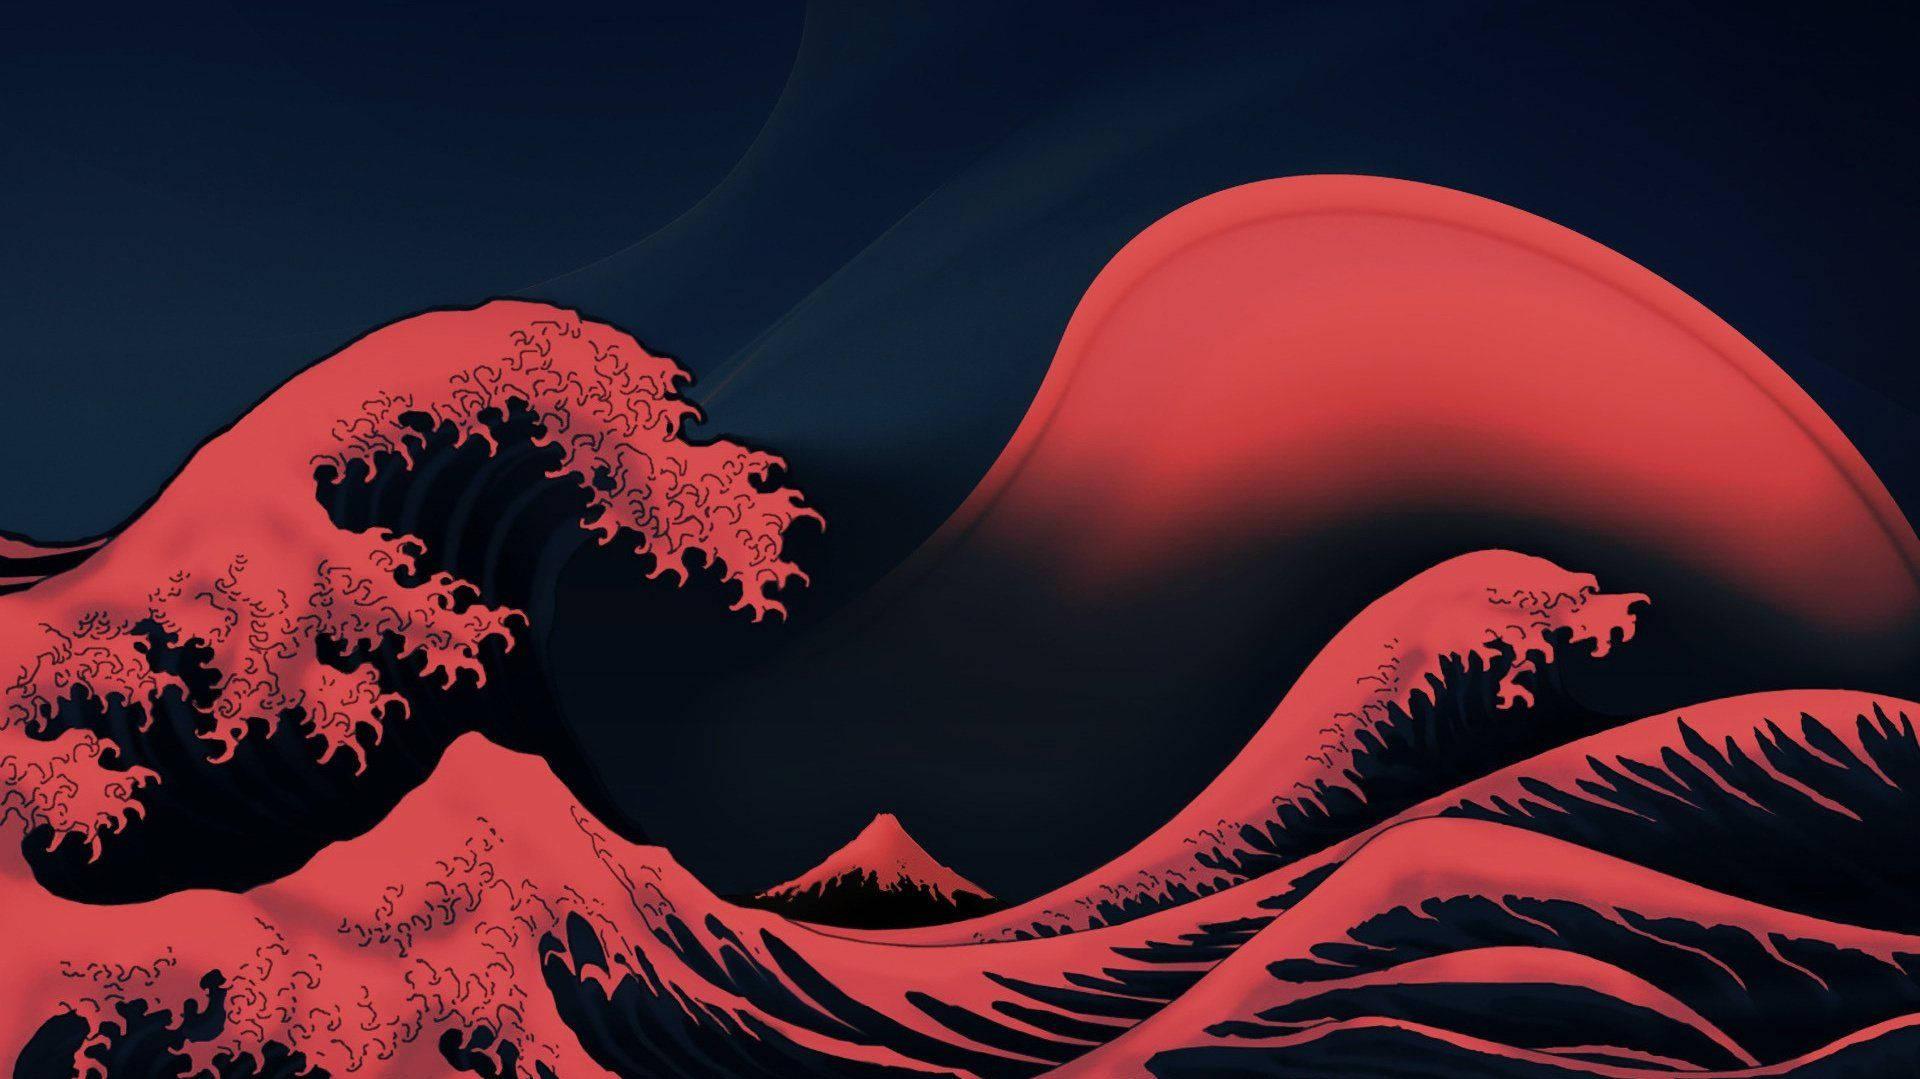 Black And Red The Great Wave Off Kanagawa Wallpaper